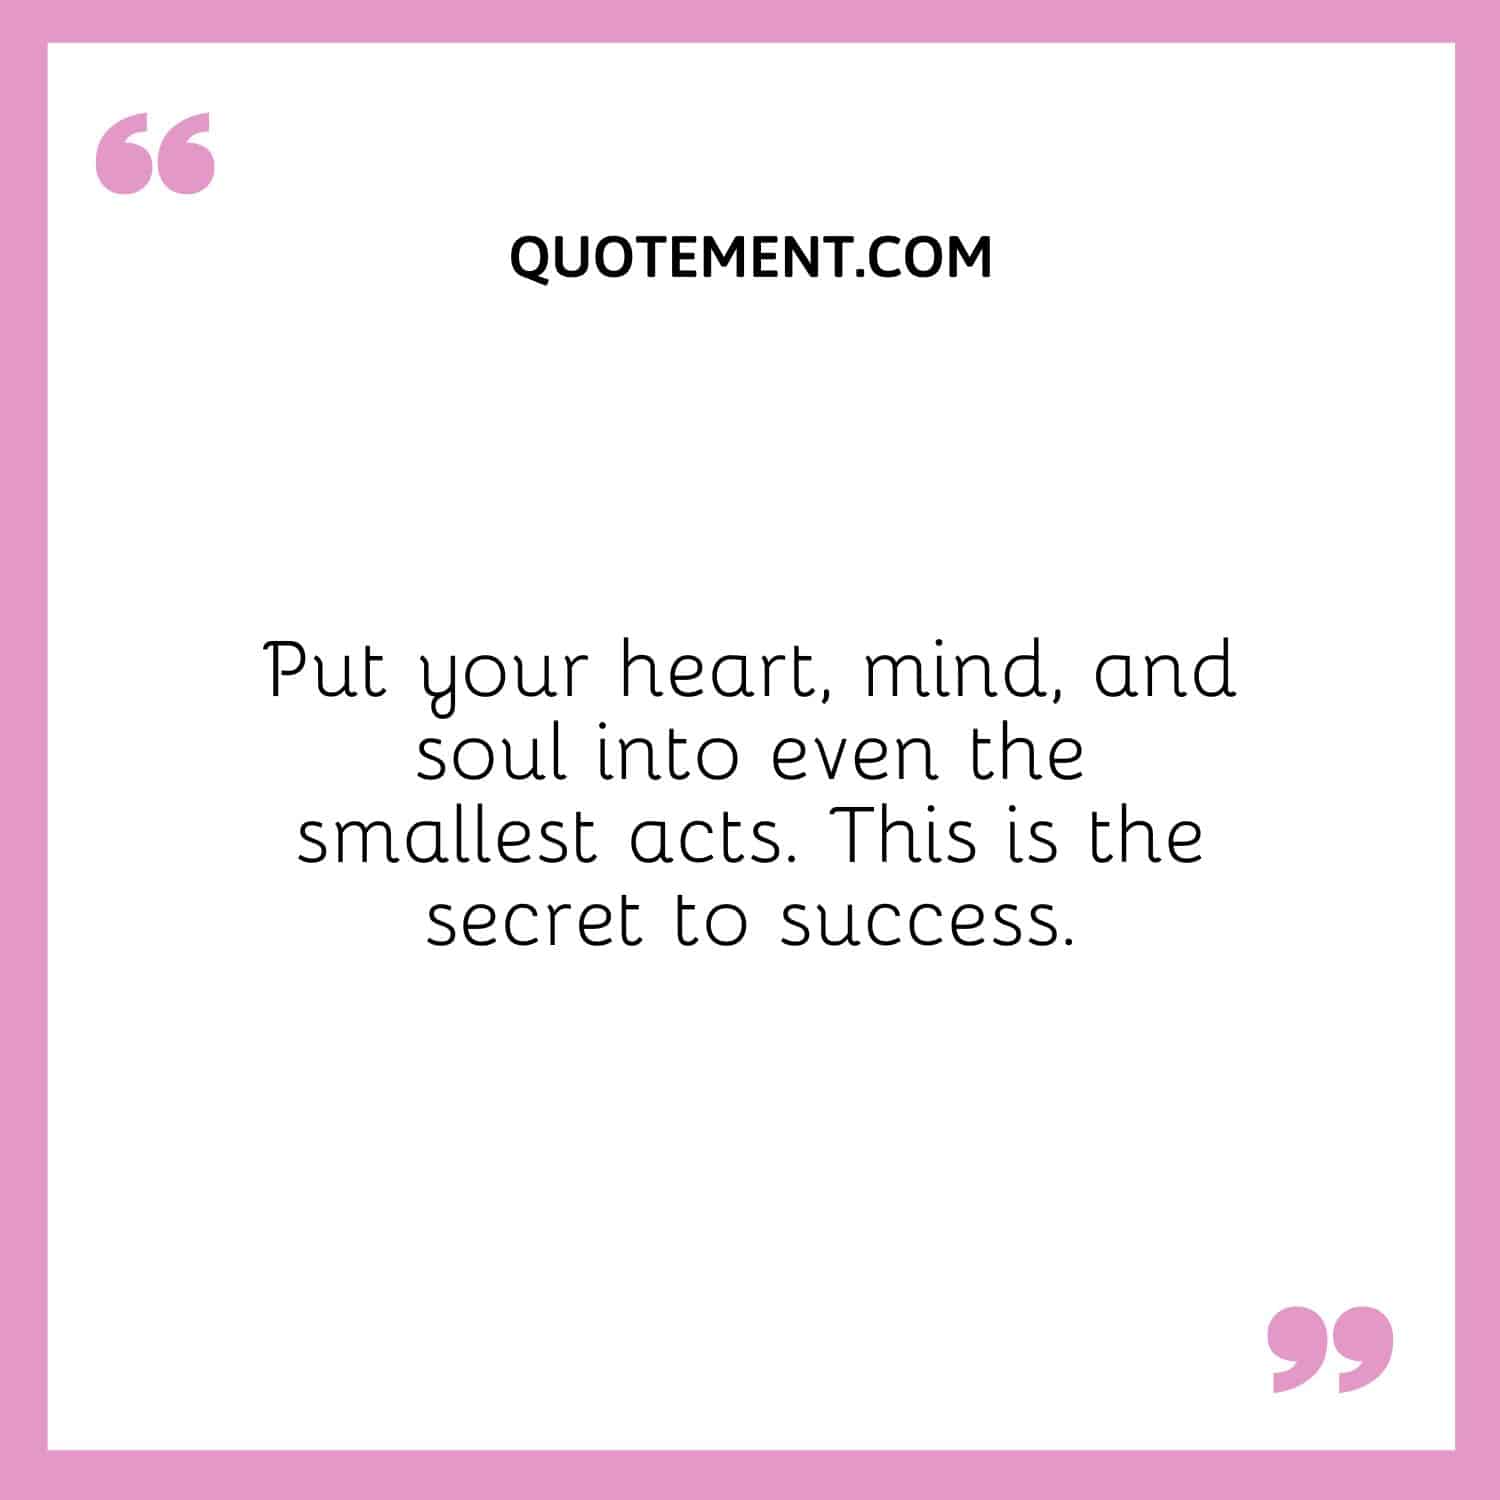 Put your heart, mind, and soul into even the smallest acts. This is the secret to success.